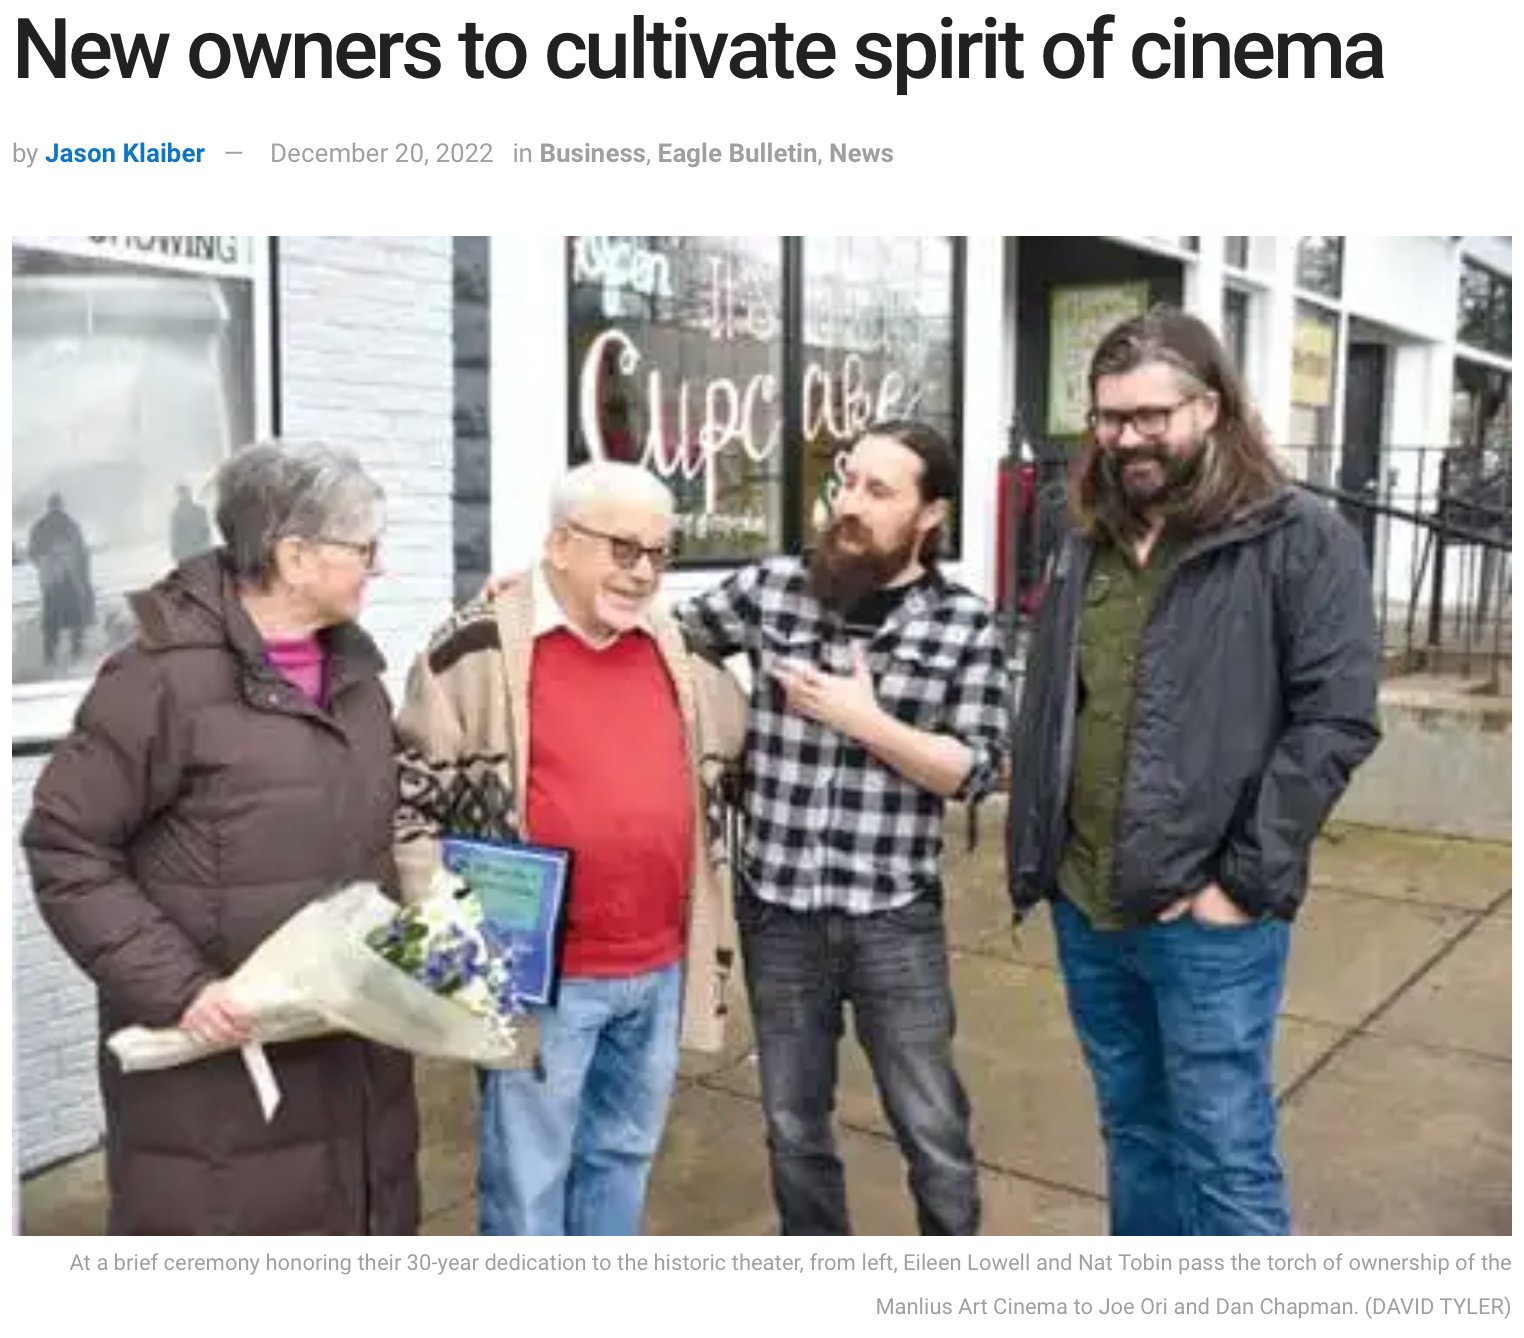 New owners to cultivate spirit of cinema